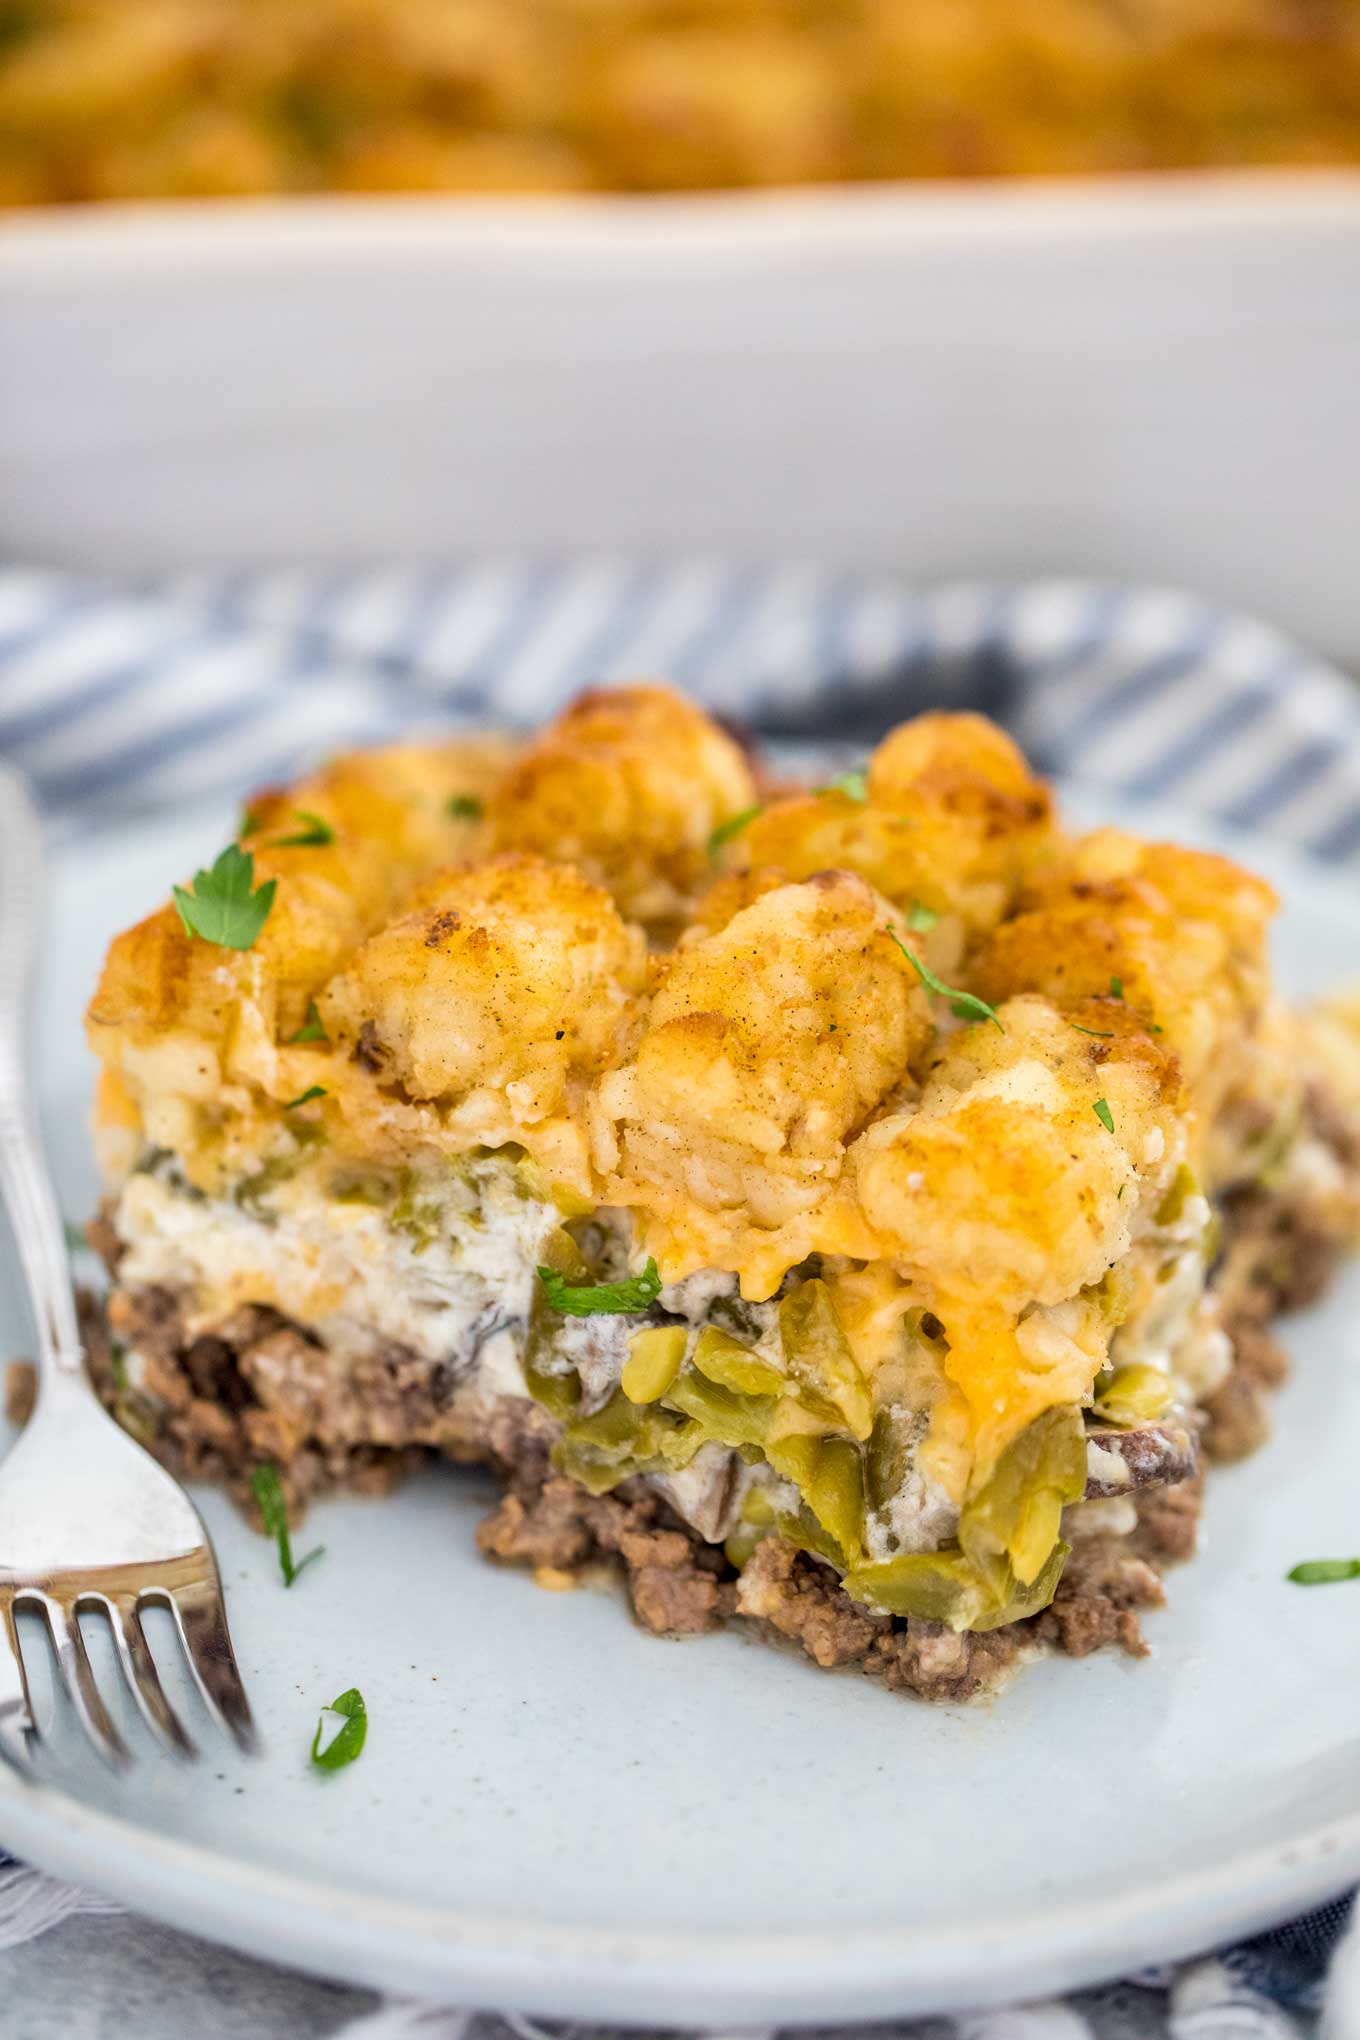 tater tot casserole recipes cooked in electric skillet